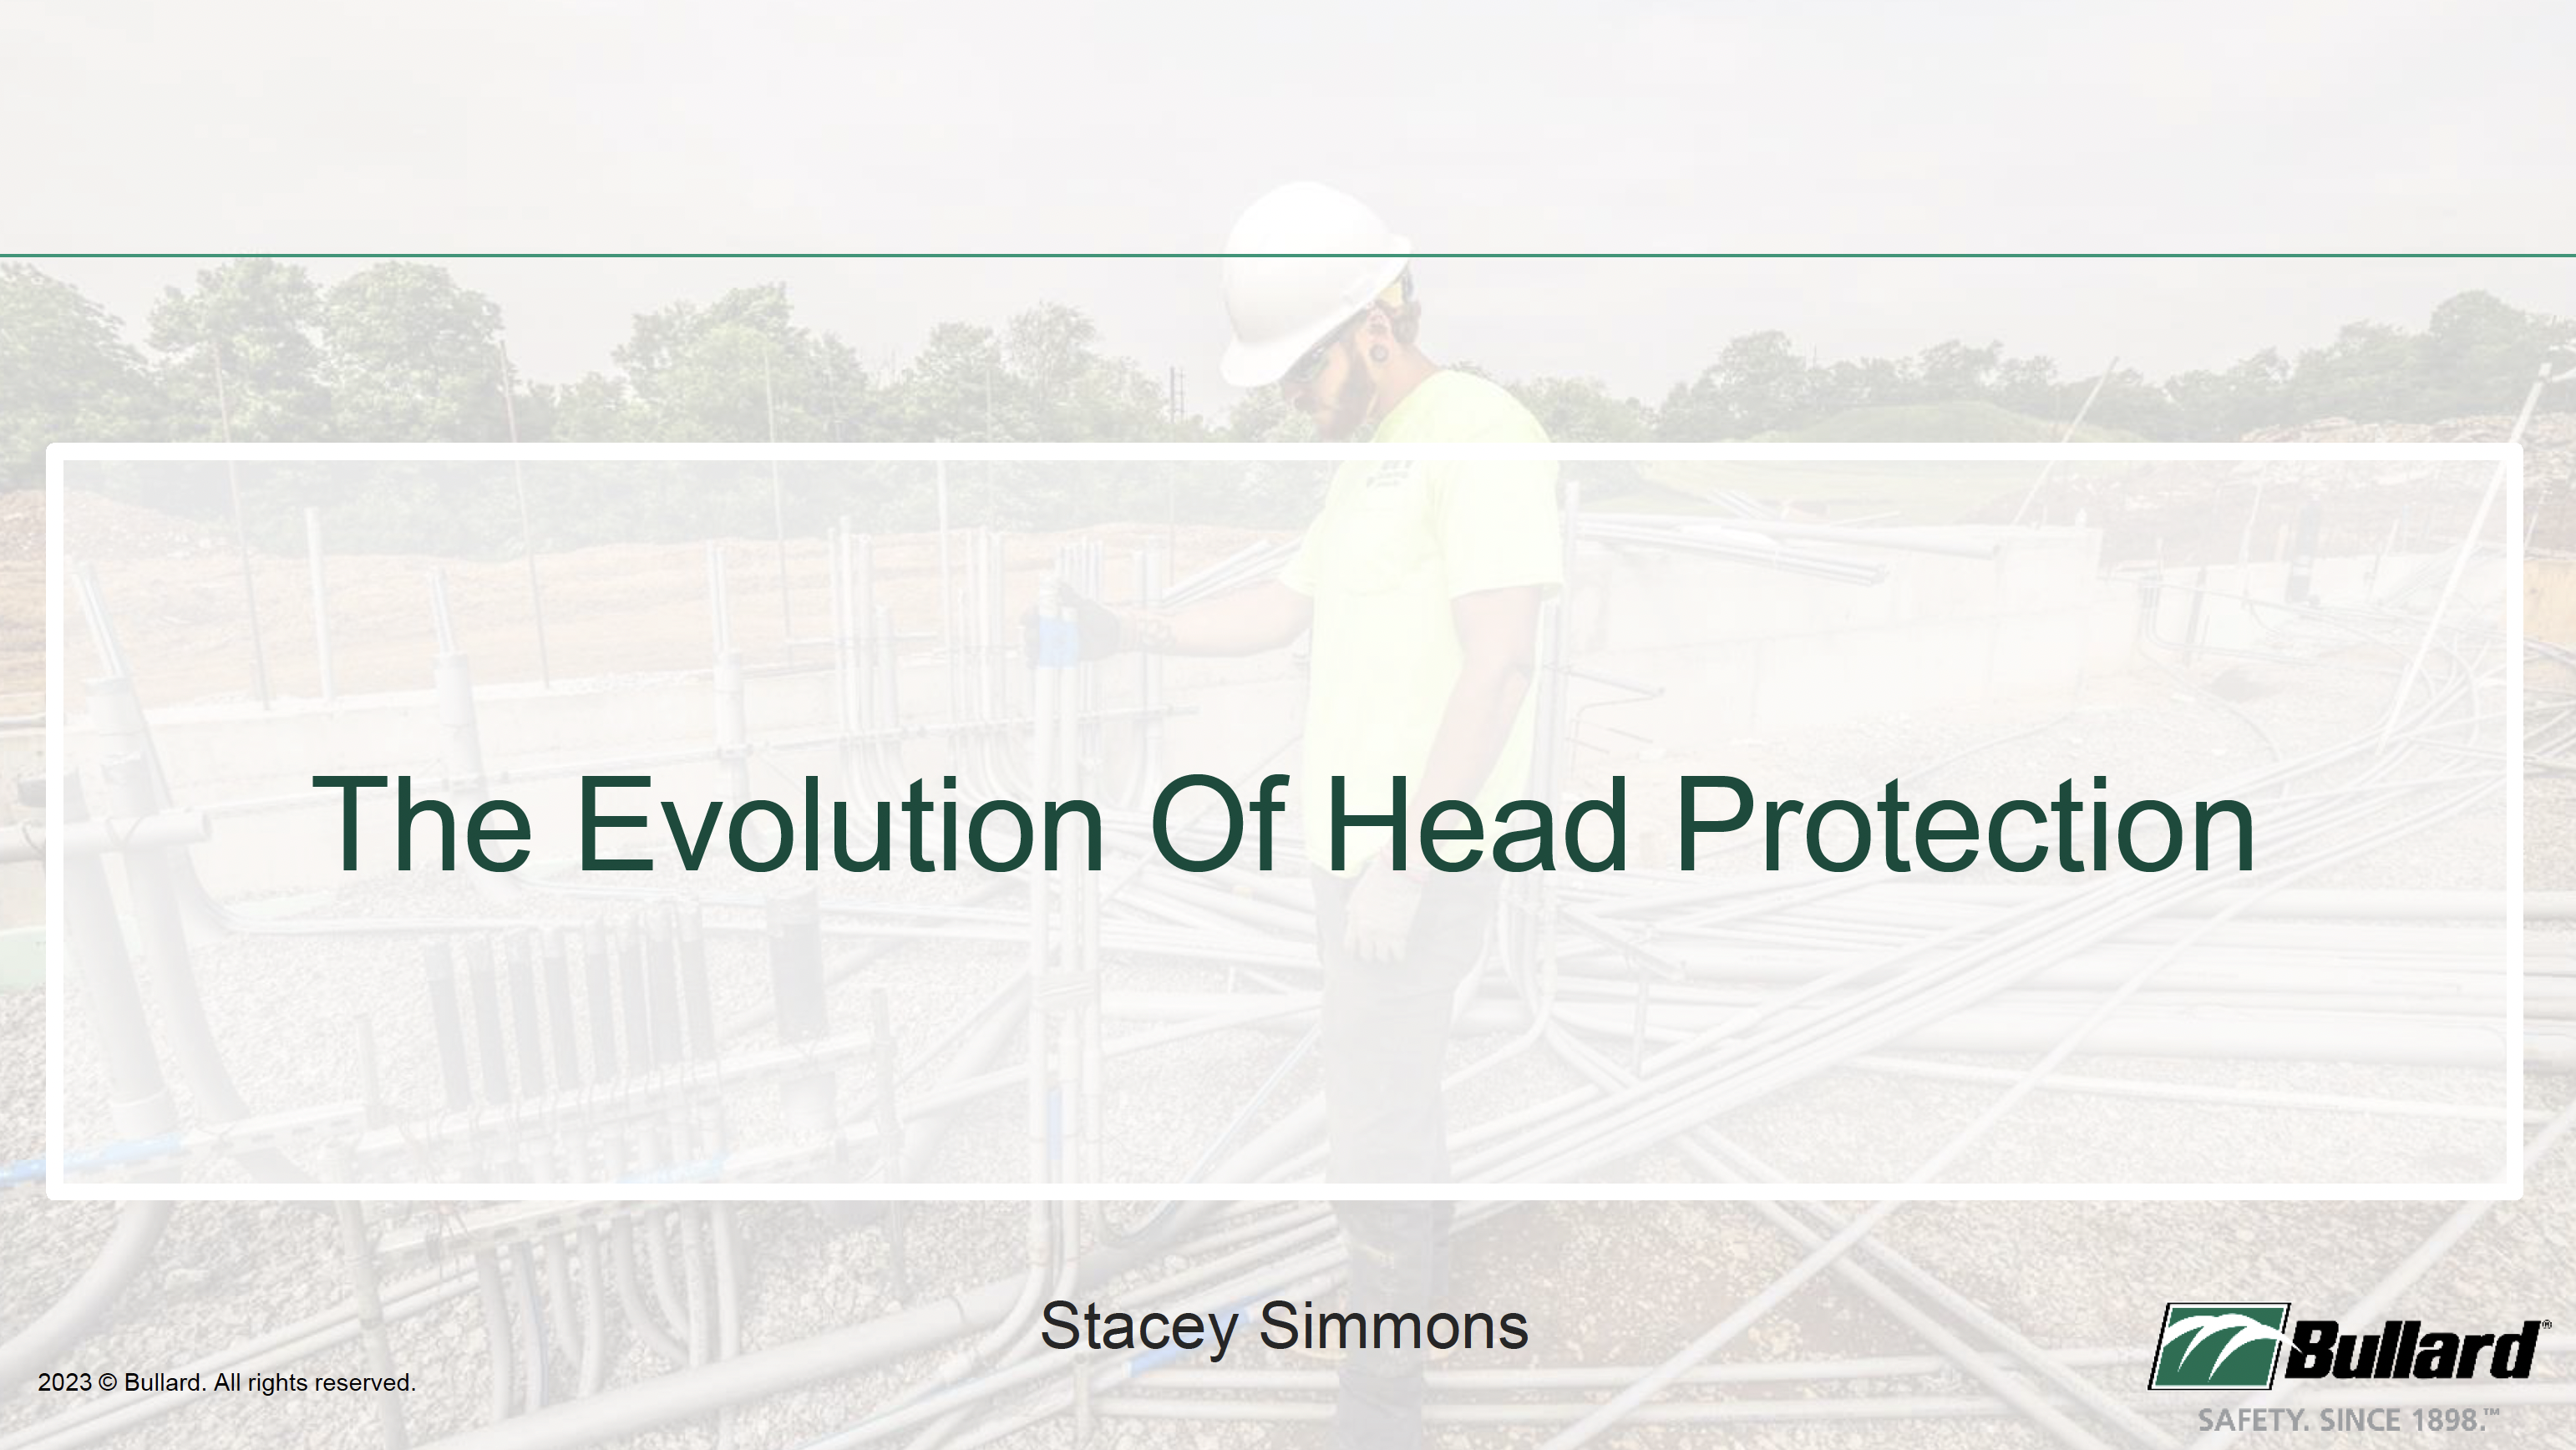 The Evolution of Head Protection